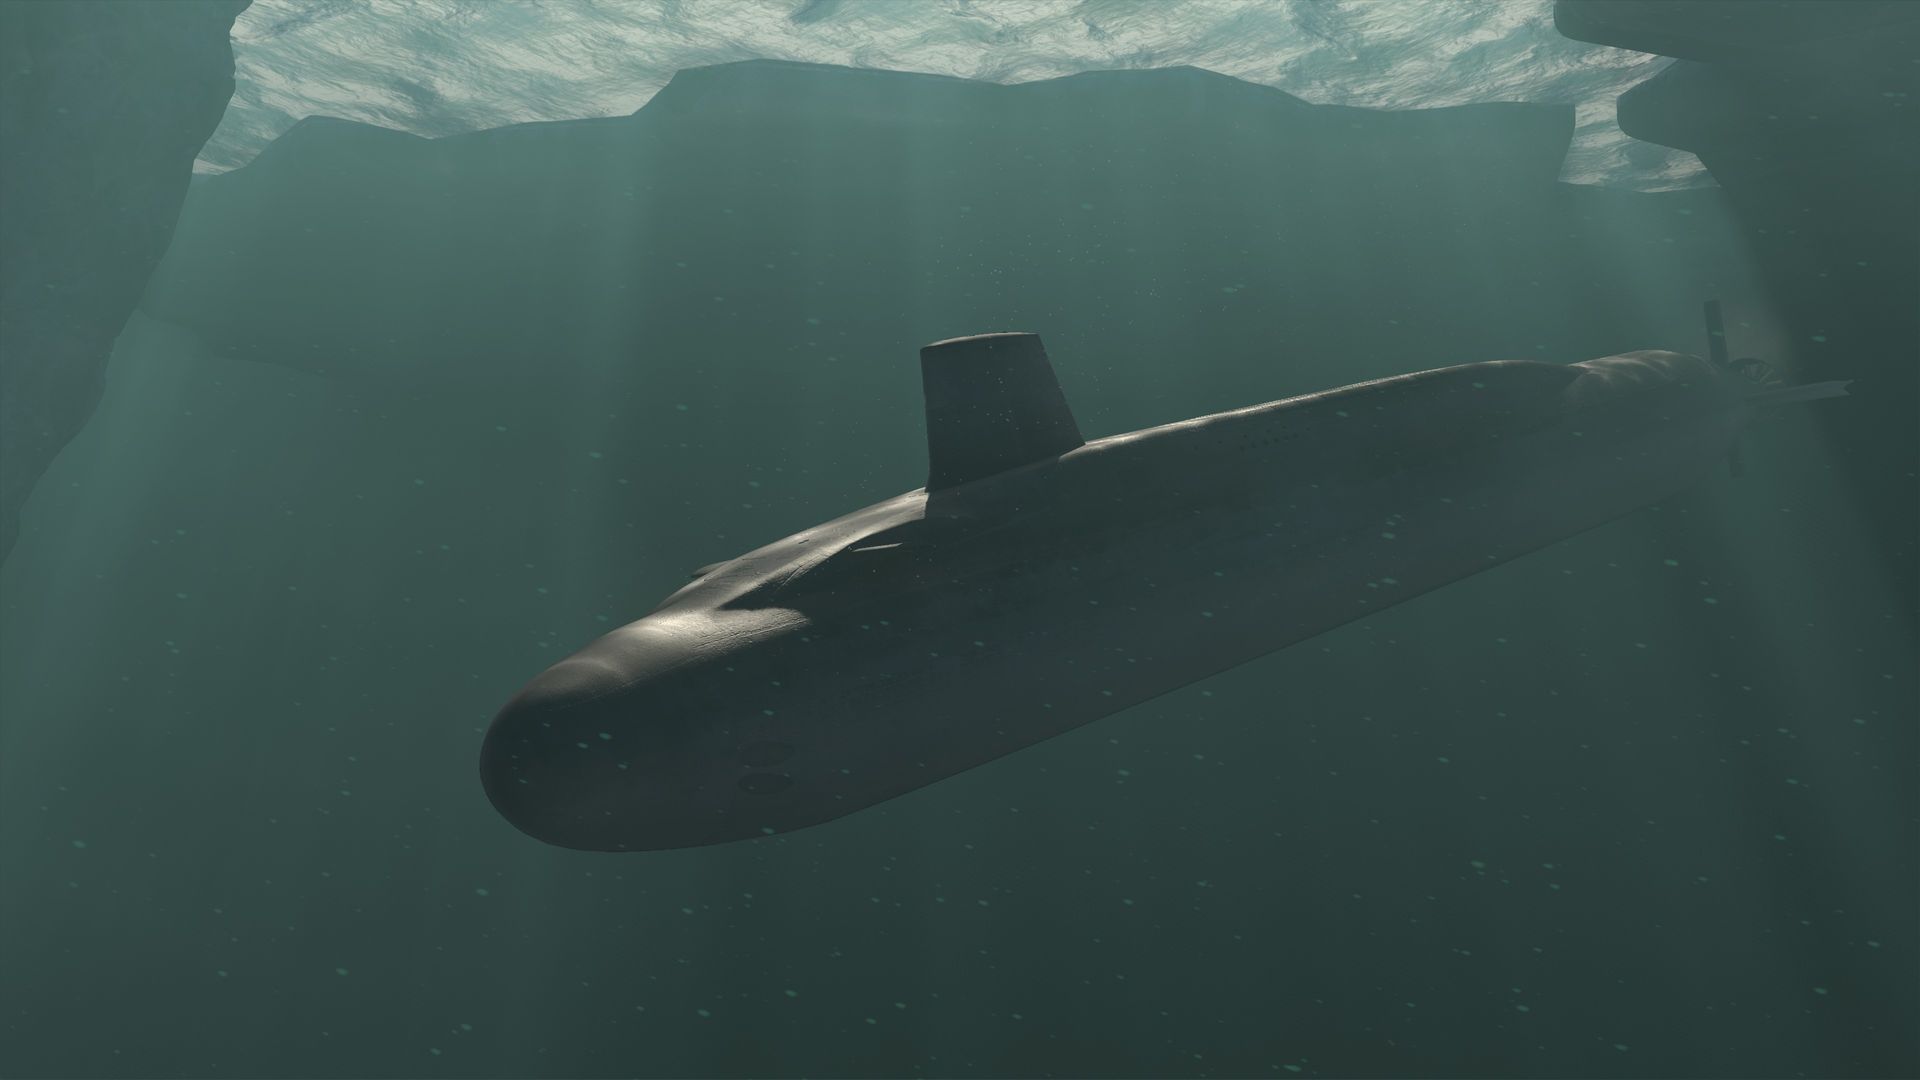 The Authors Of War Thunder Announced Silent Thunder &#8211; Military Online Game About Atomic Submarines